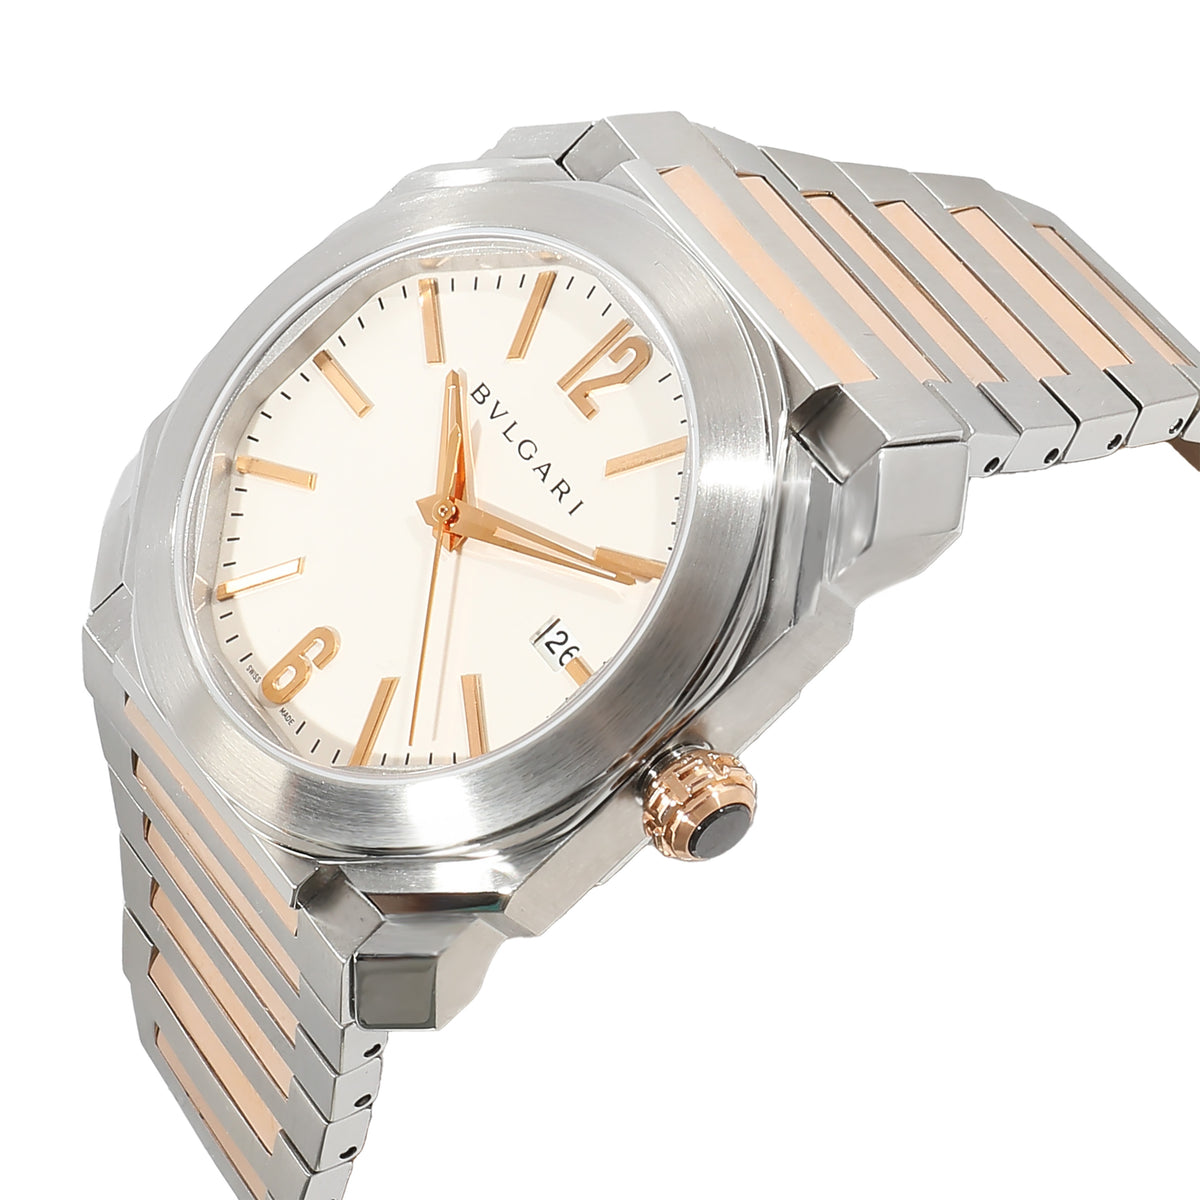 Octo Solotempo BGO 38 S Men's Watch in 18kt Stainless Steel/Rose Gold